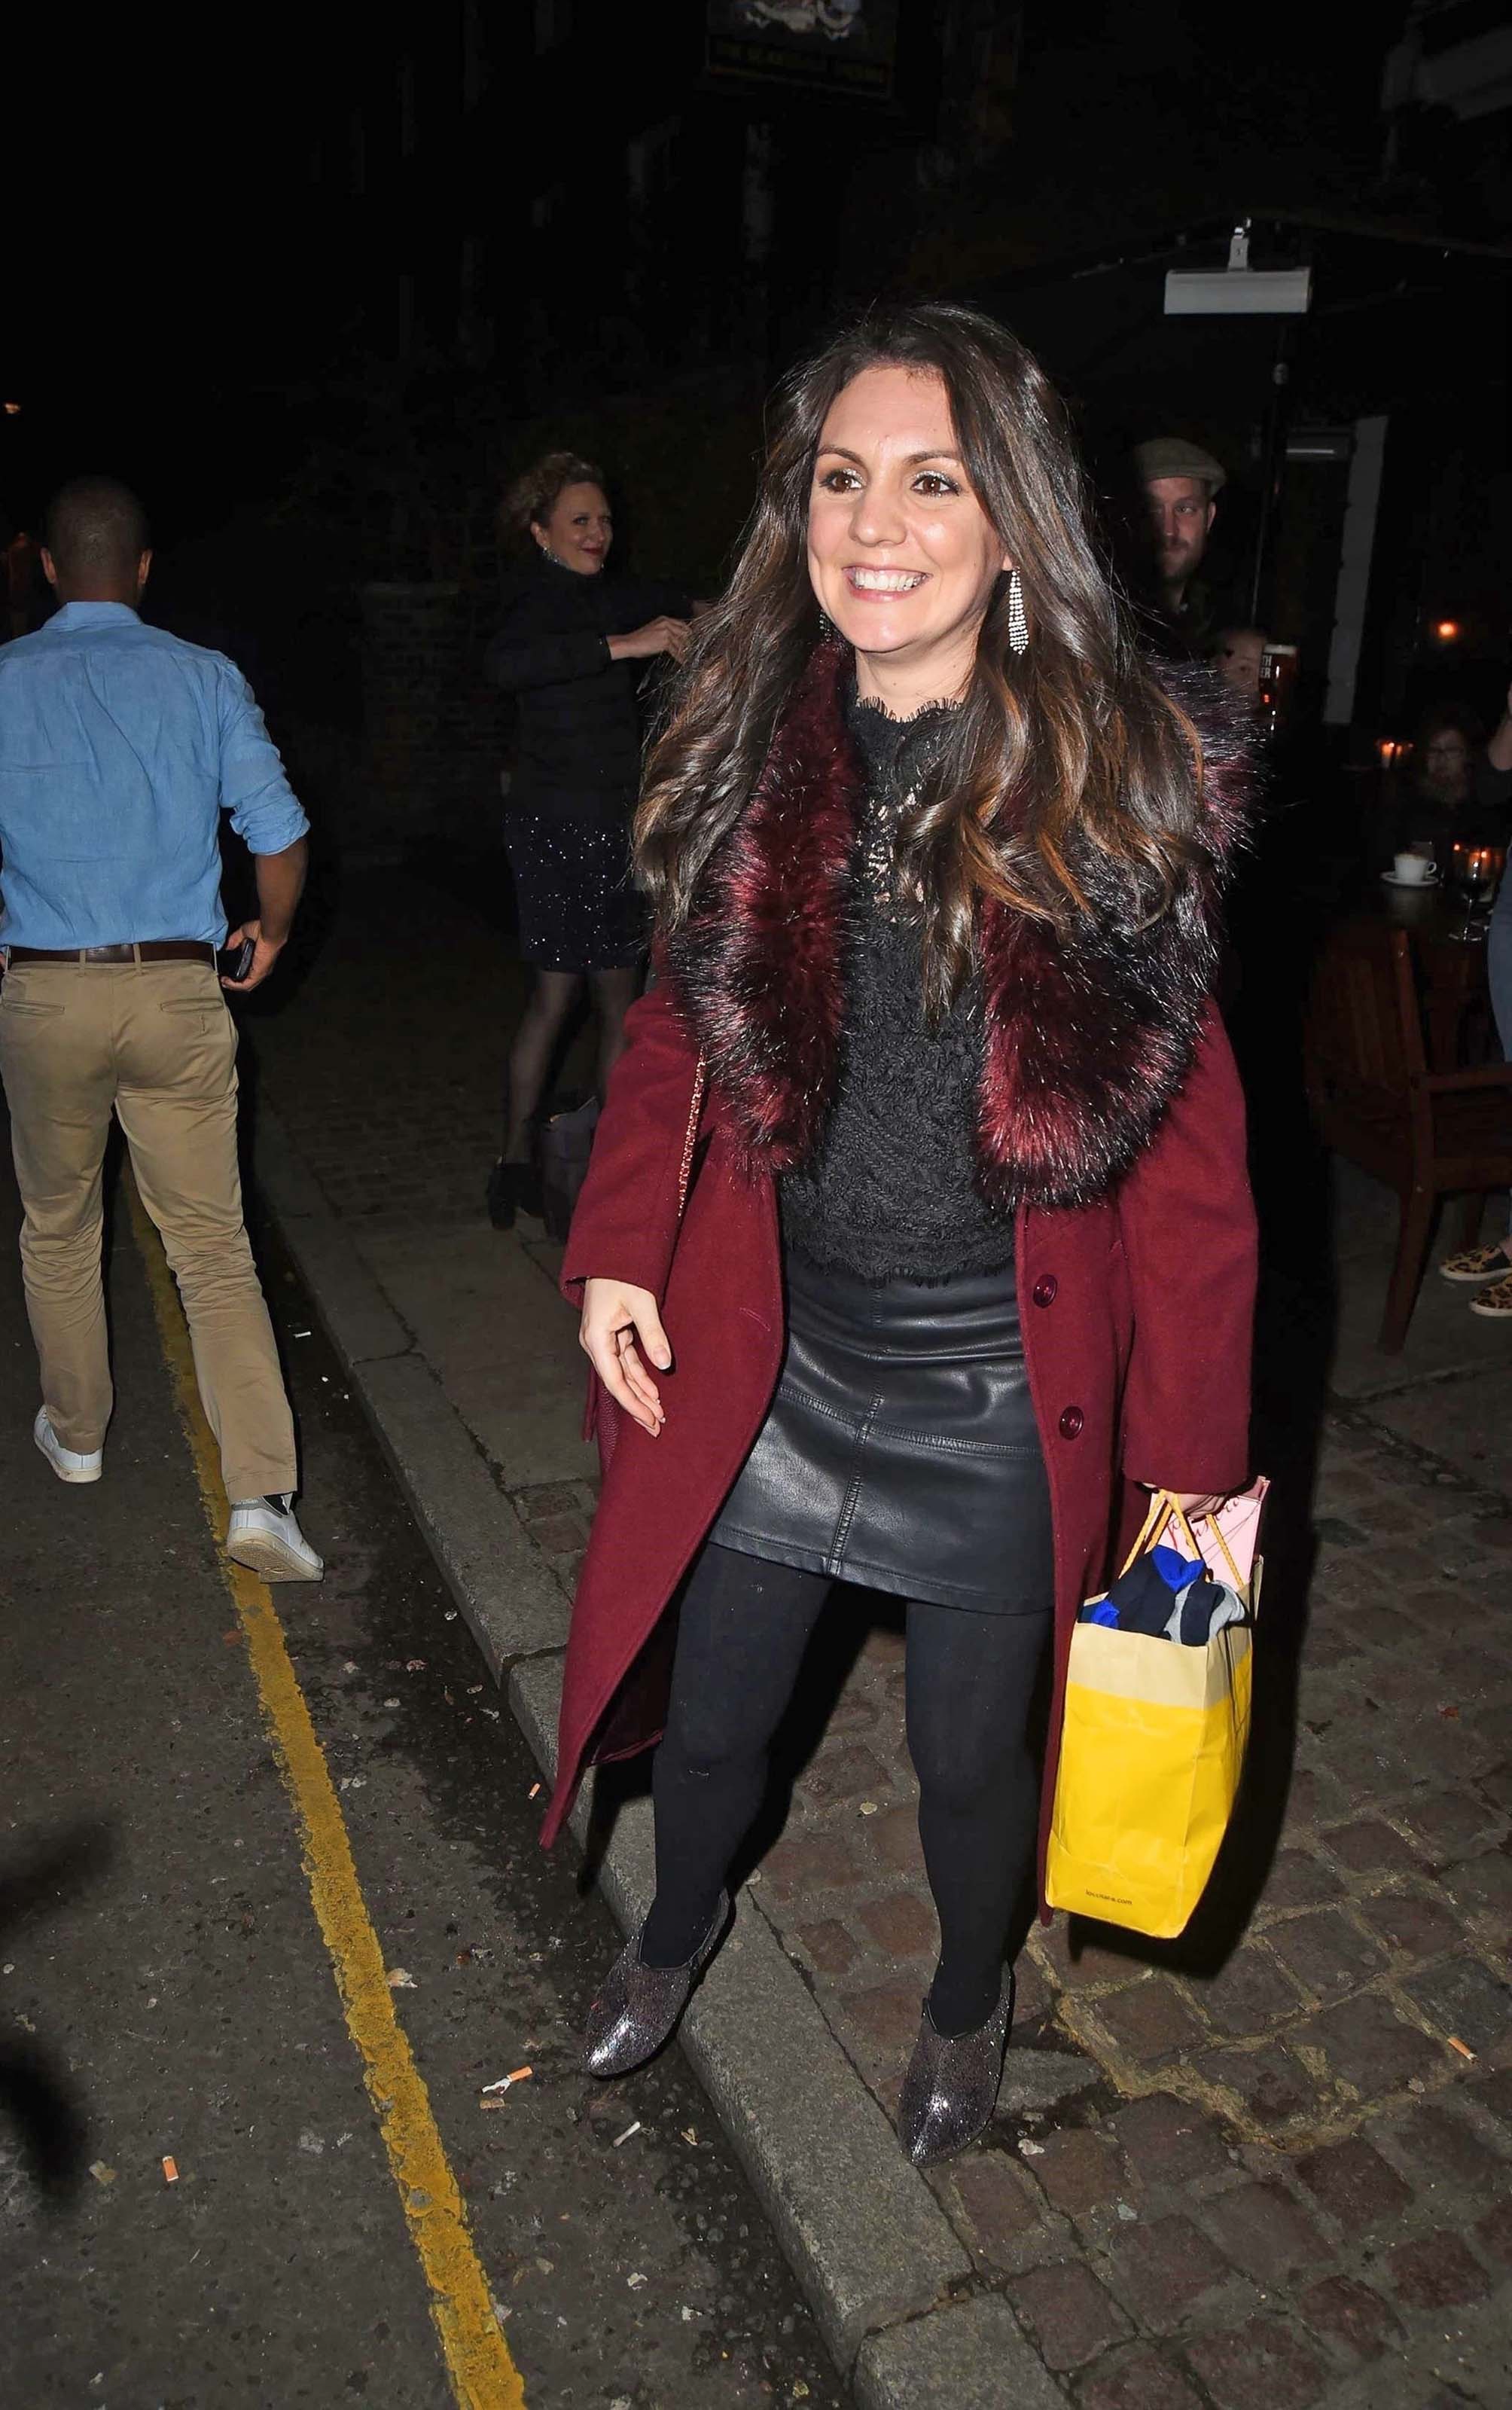 Laura Tobin attends Piers Morgan’s Christmas Party